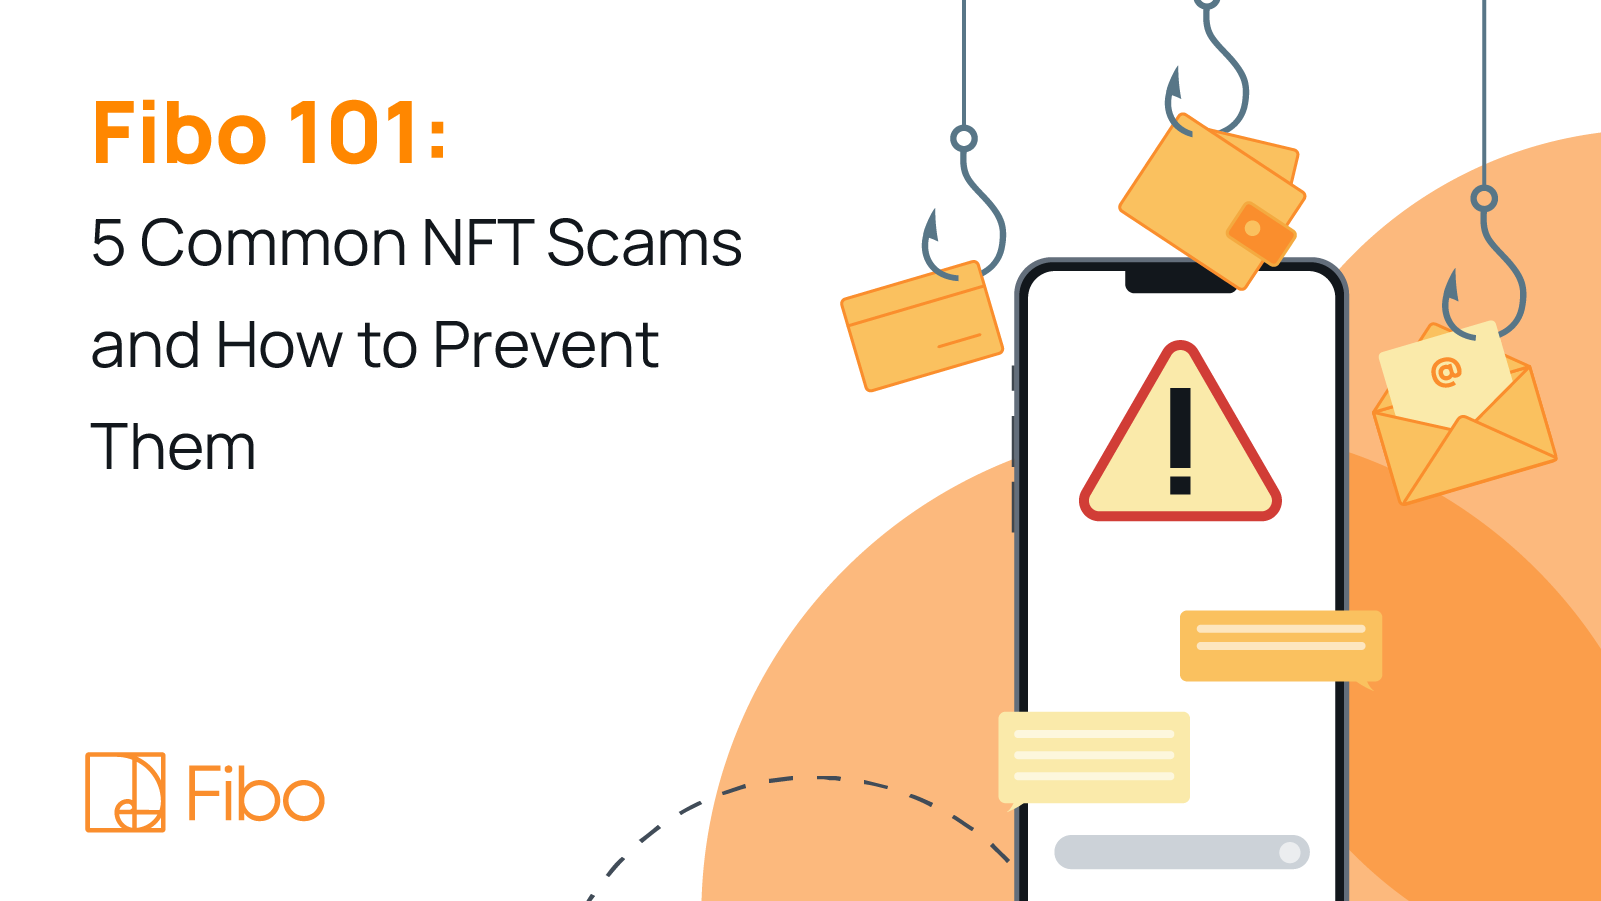 Fibo-Cardano-NFT-5-Common-NFT-Scams-How-To-Prevent-Them.png